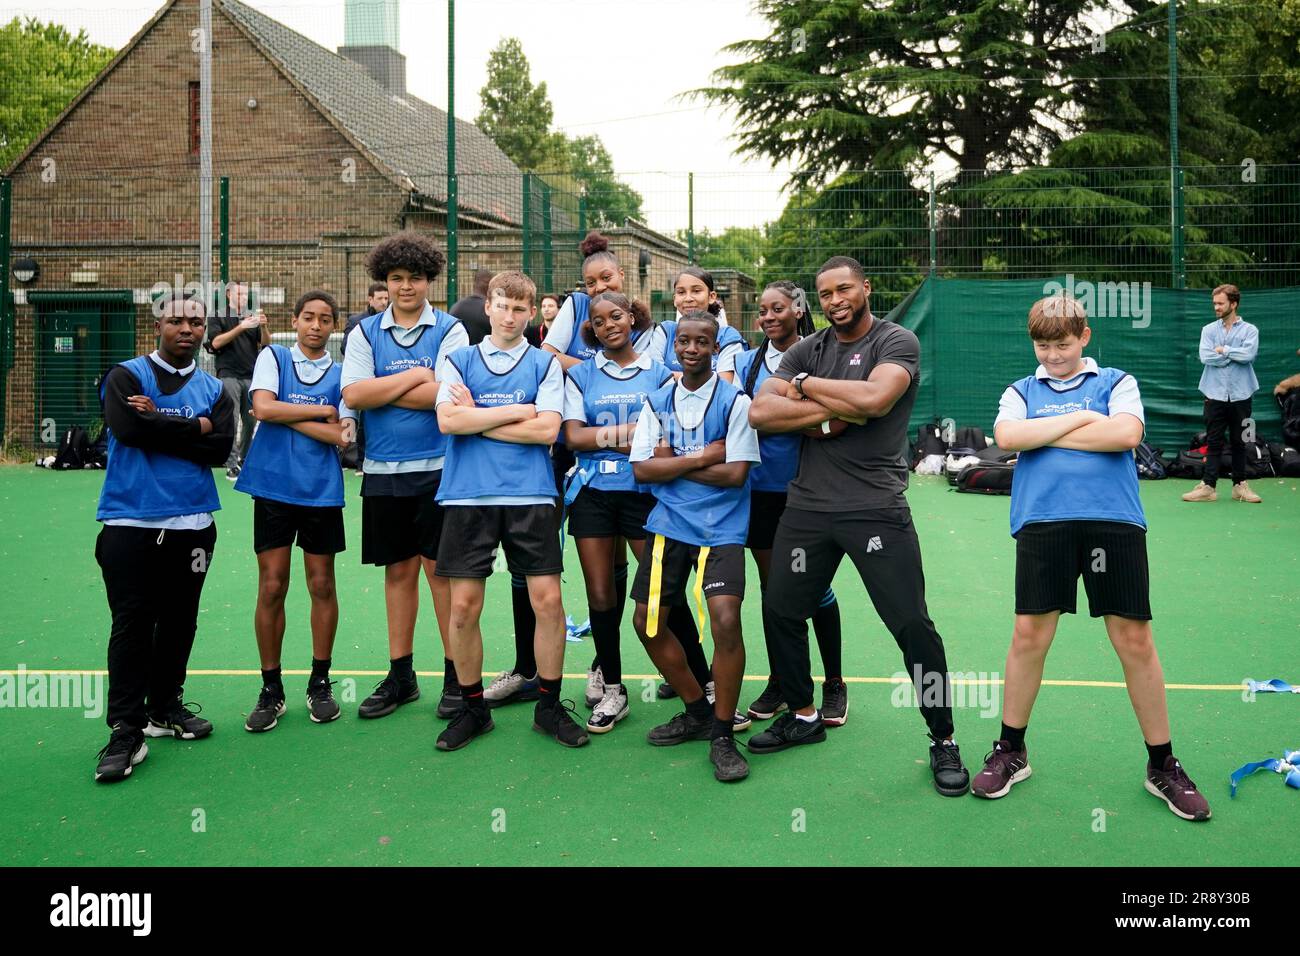 Kevin Byard from the NFL team Tennessee Titans poses for a photo with students during a visit to Gladesmore Community School, London. Stock Photo